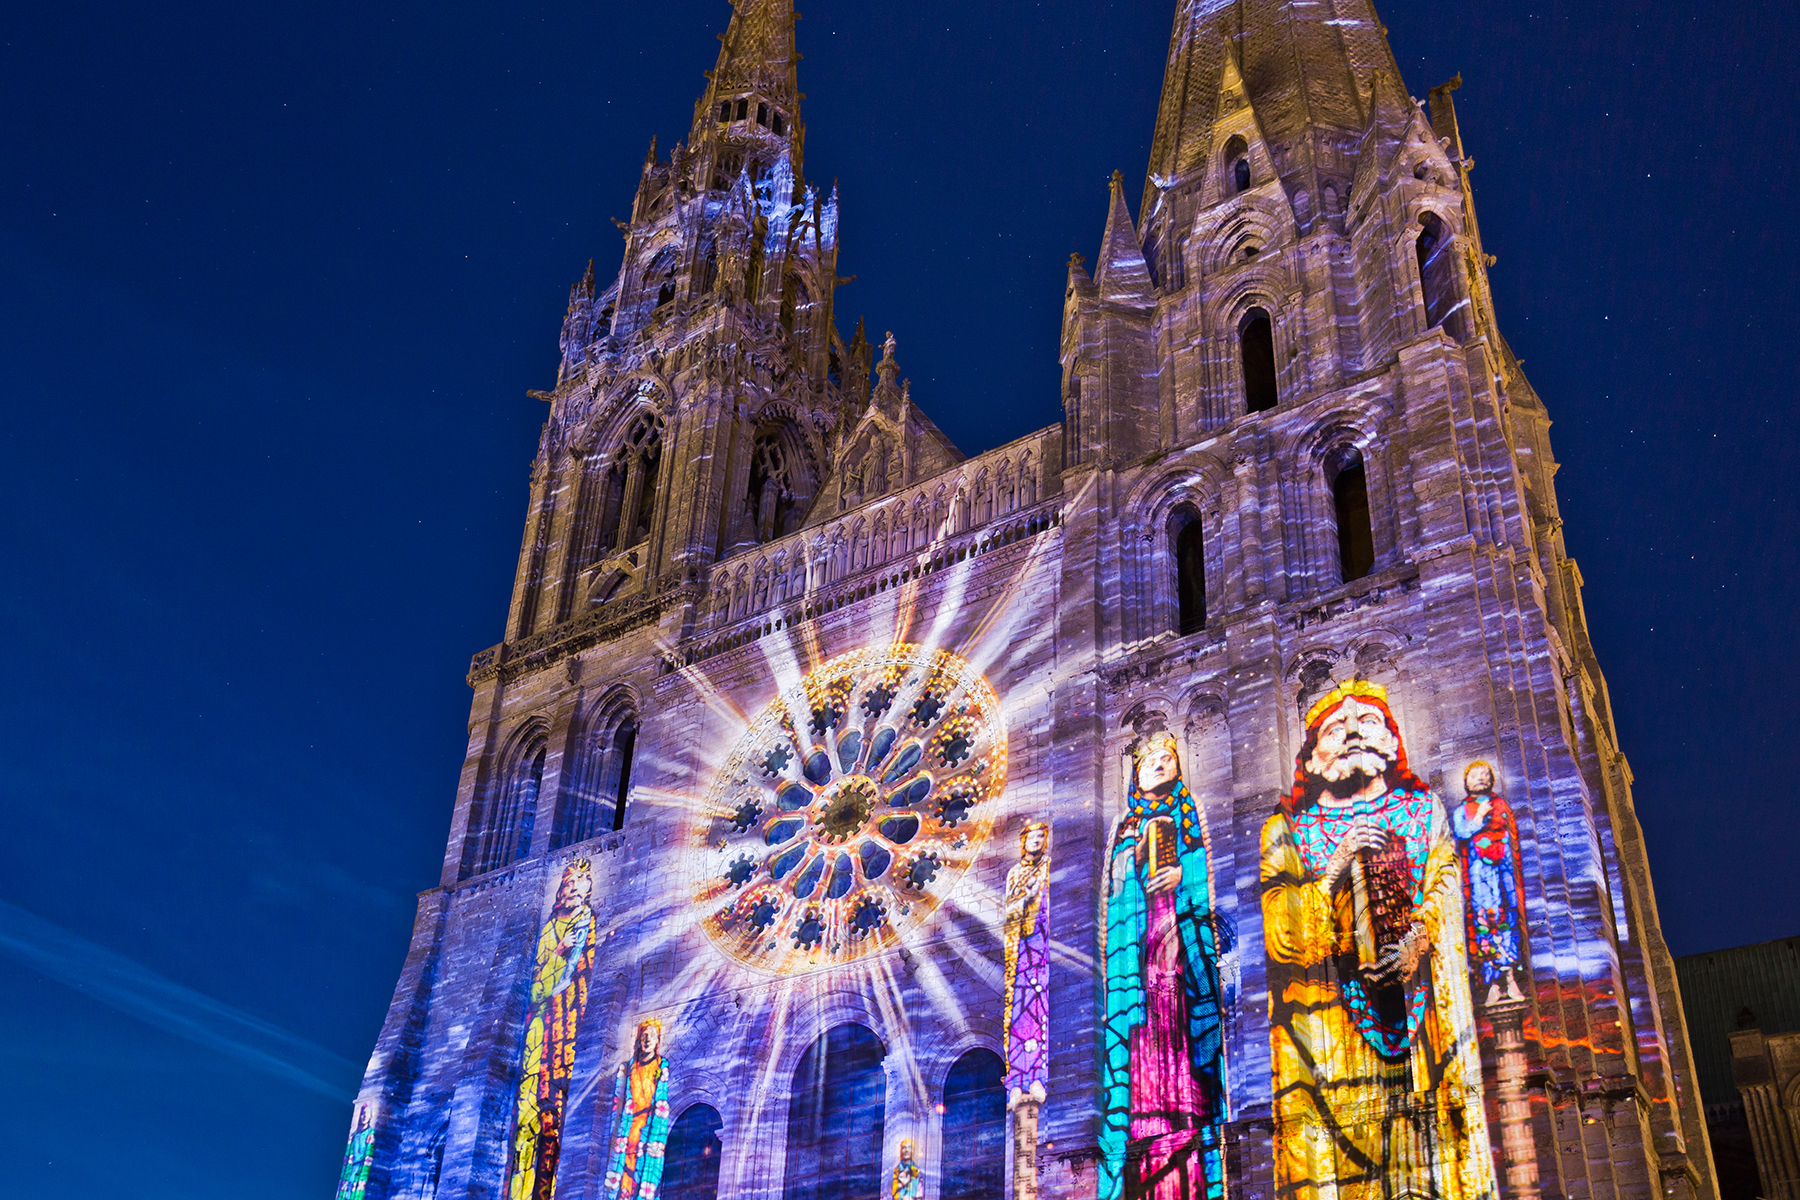 Chartres - iconic French cathedral city